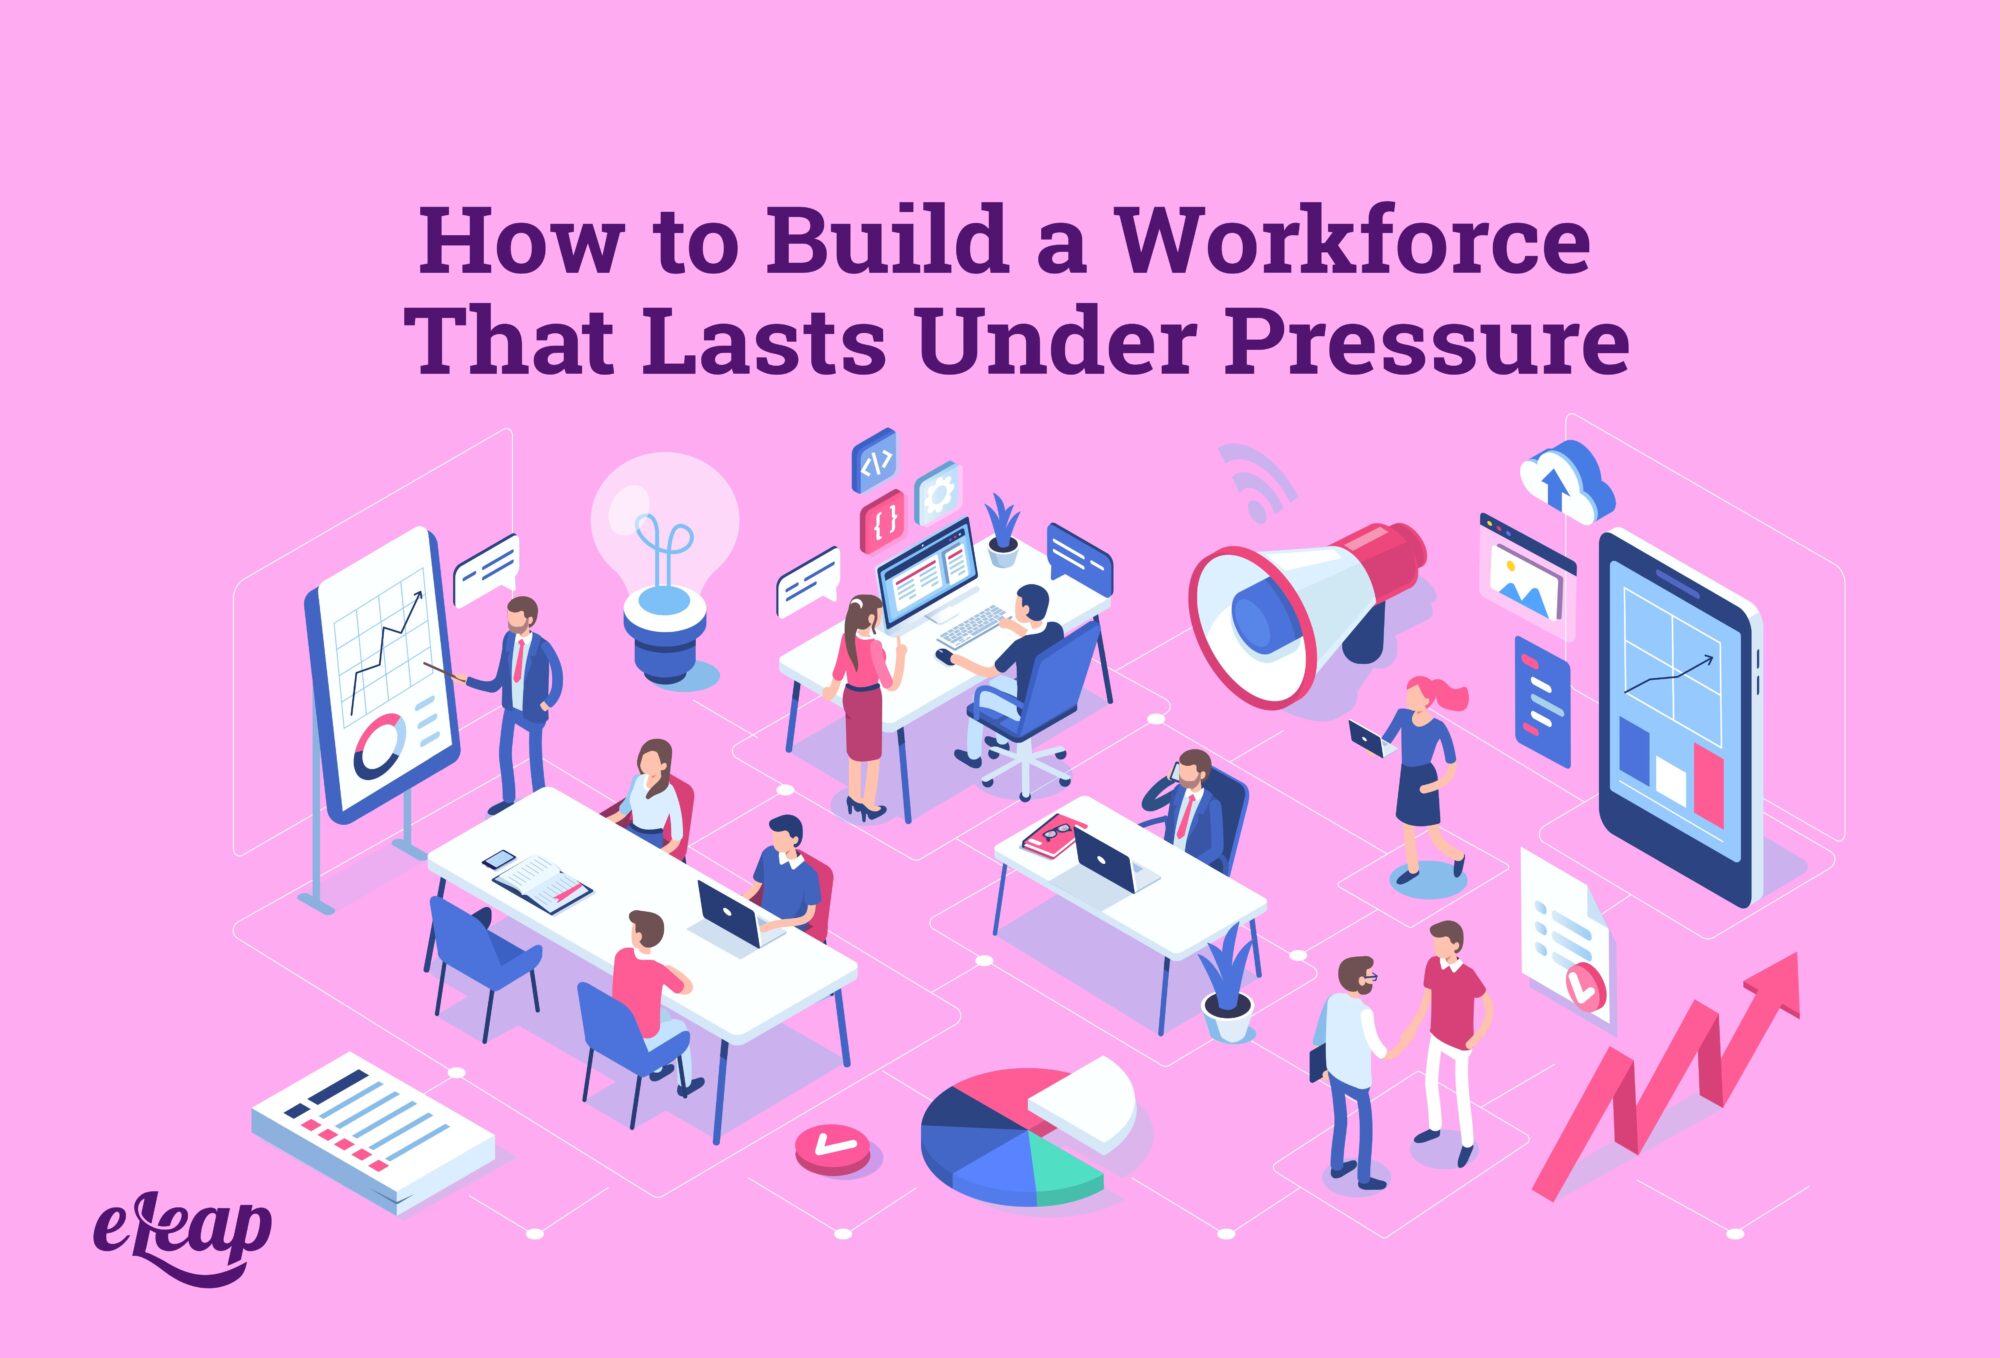 How to Build a Workforce That Lasts Under Pressure